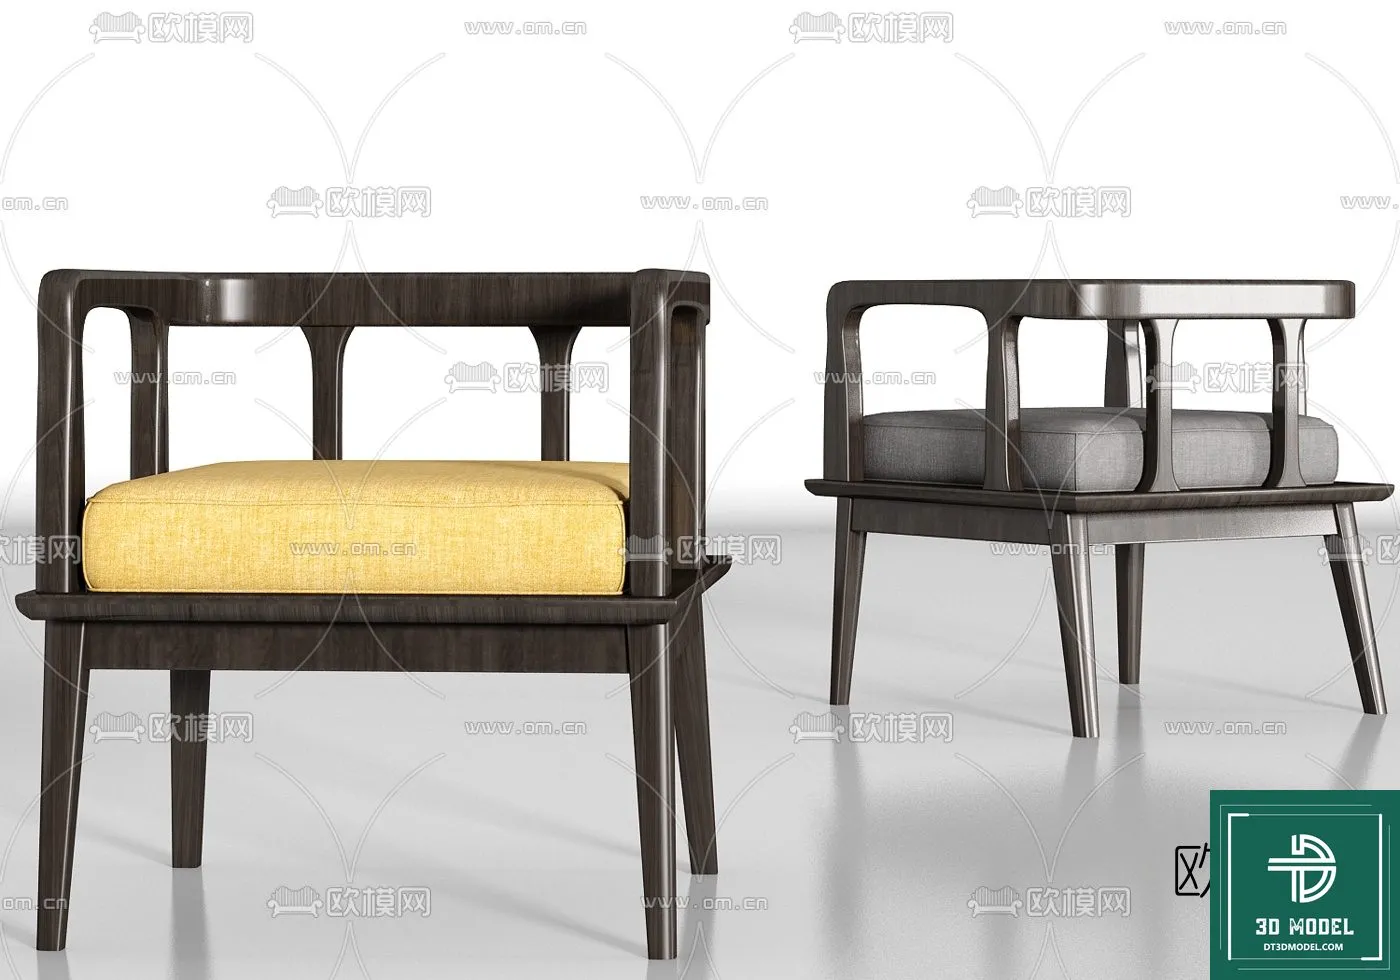 INDOCHINE STYLE – 3D MODELS – 296